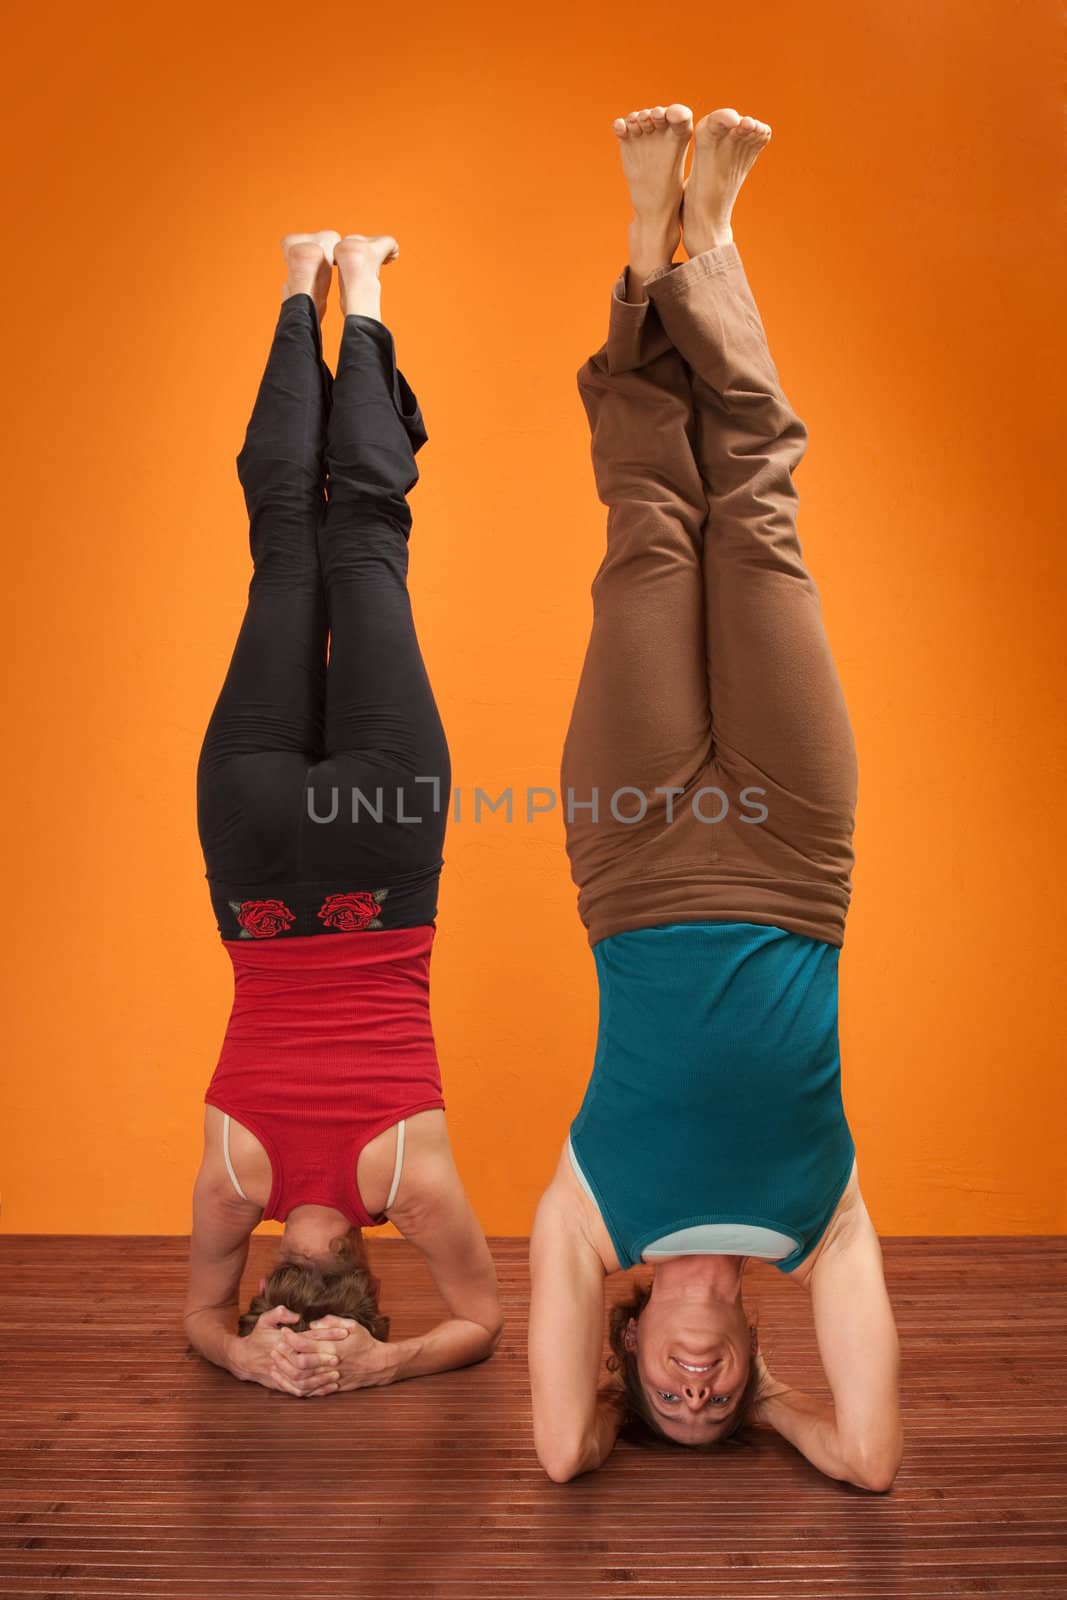 Two women perform Sirsasana headstand positions over orange background